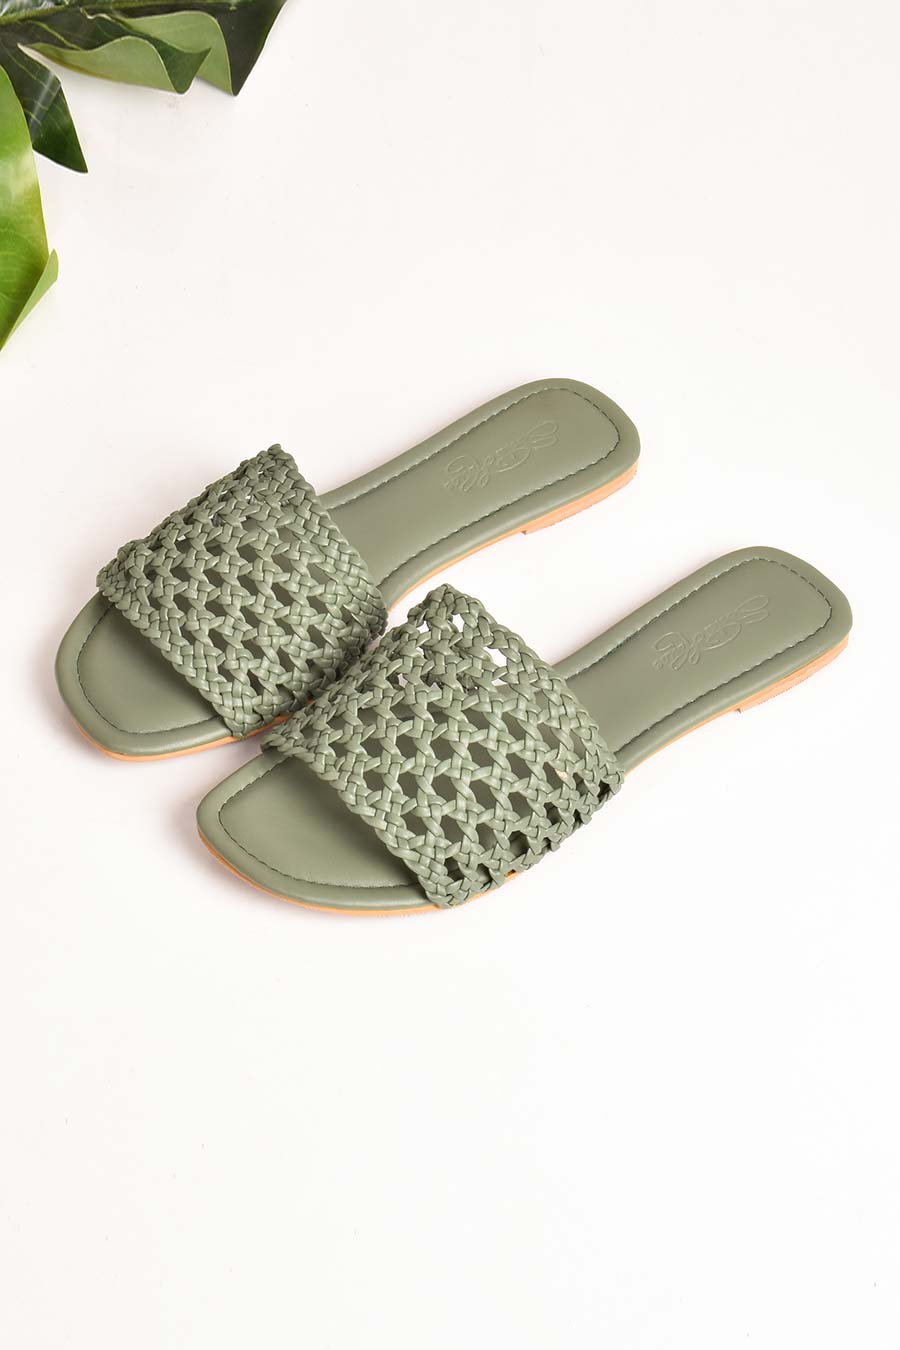 Hand Woven Olive Green Sliders